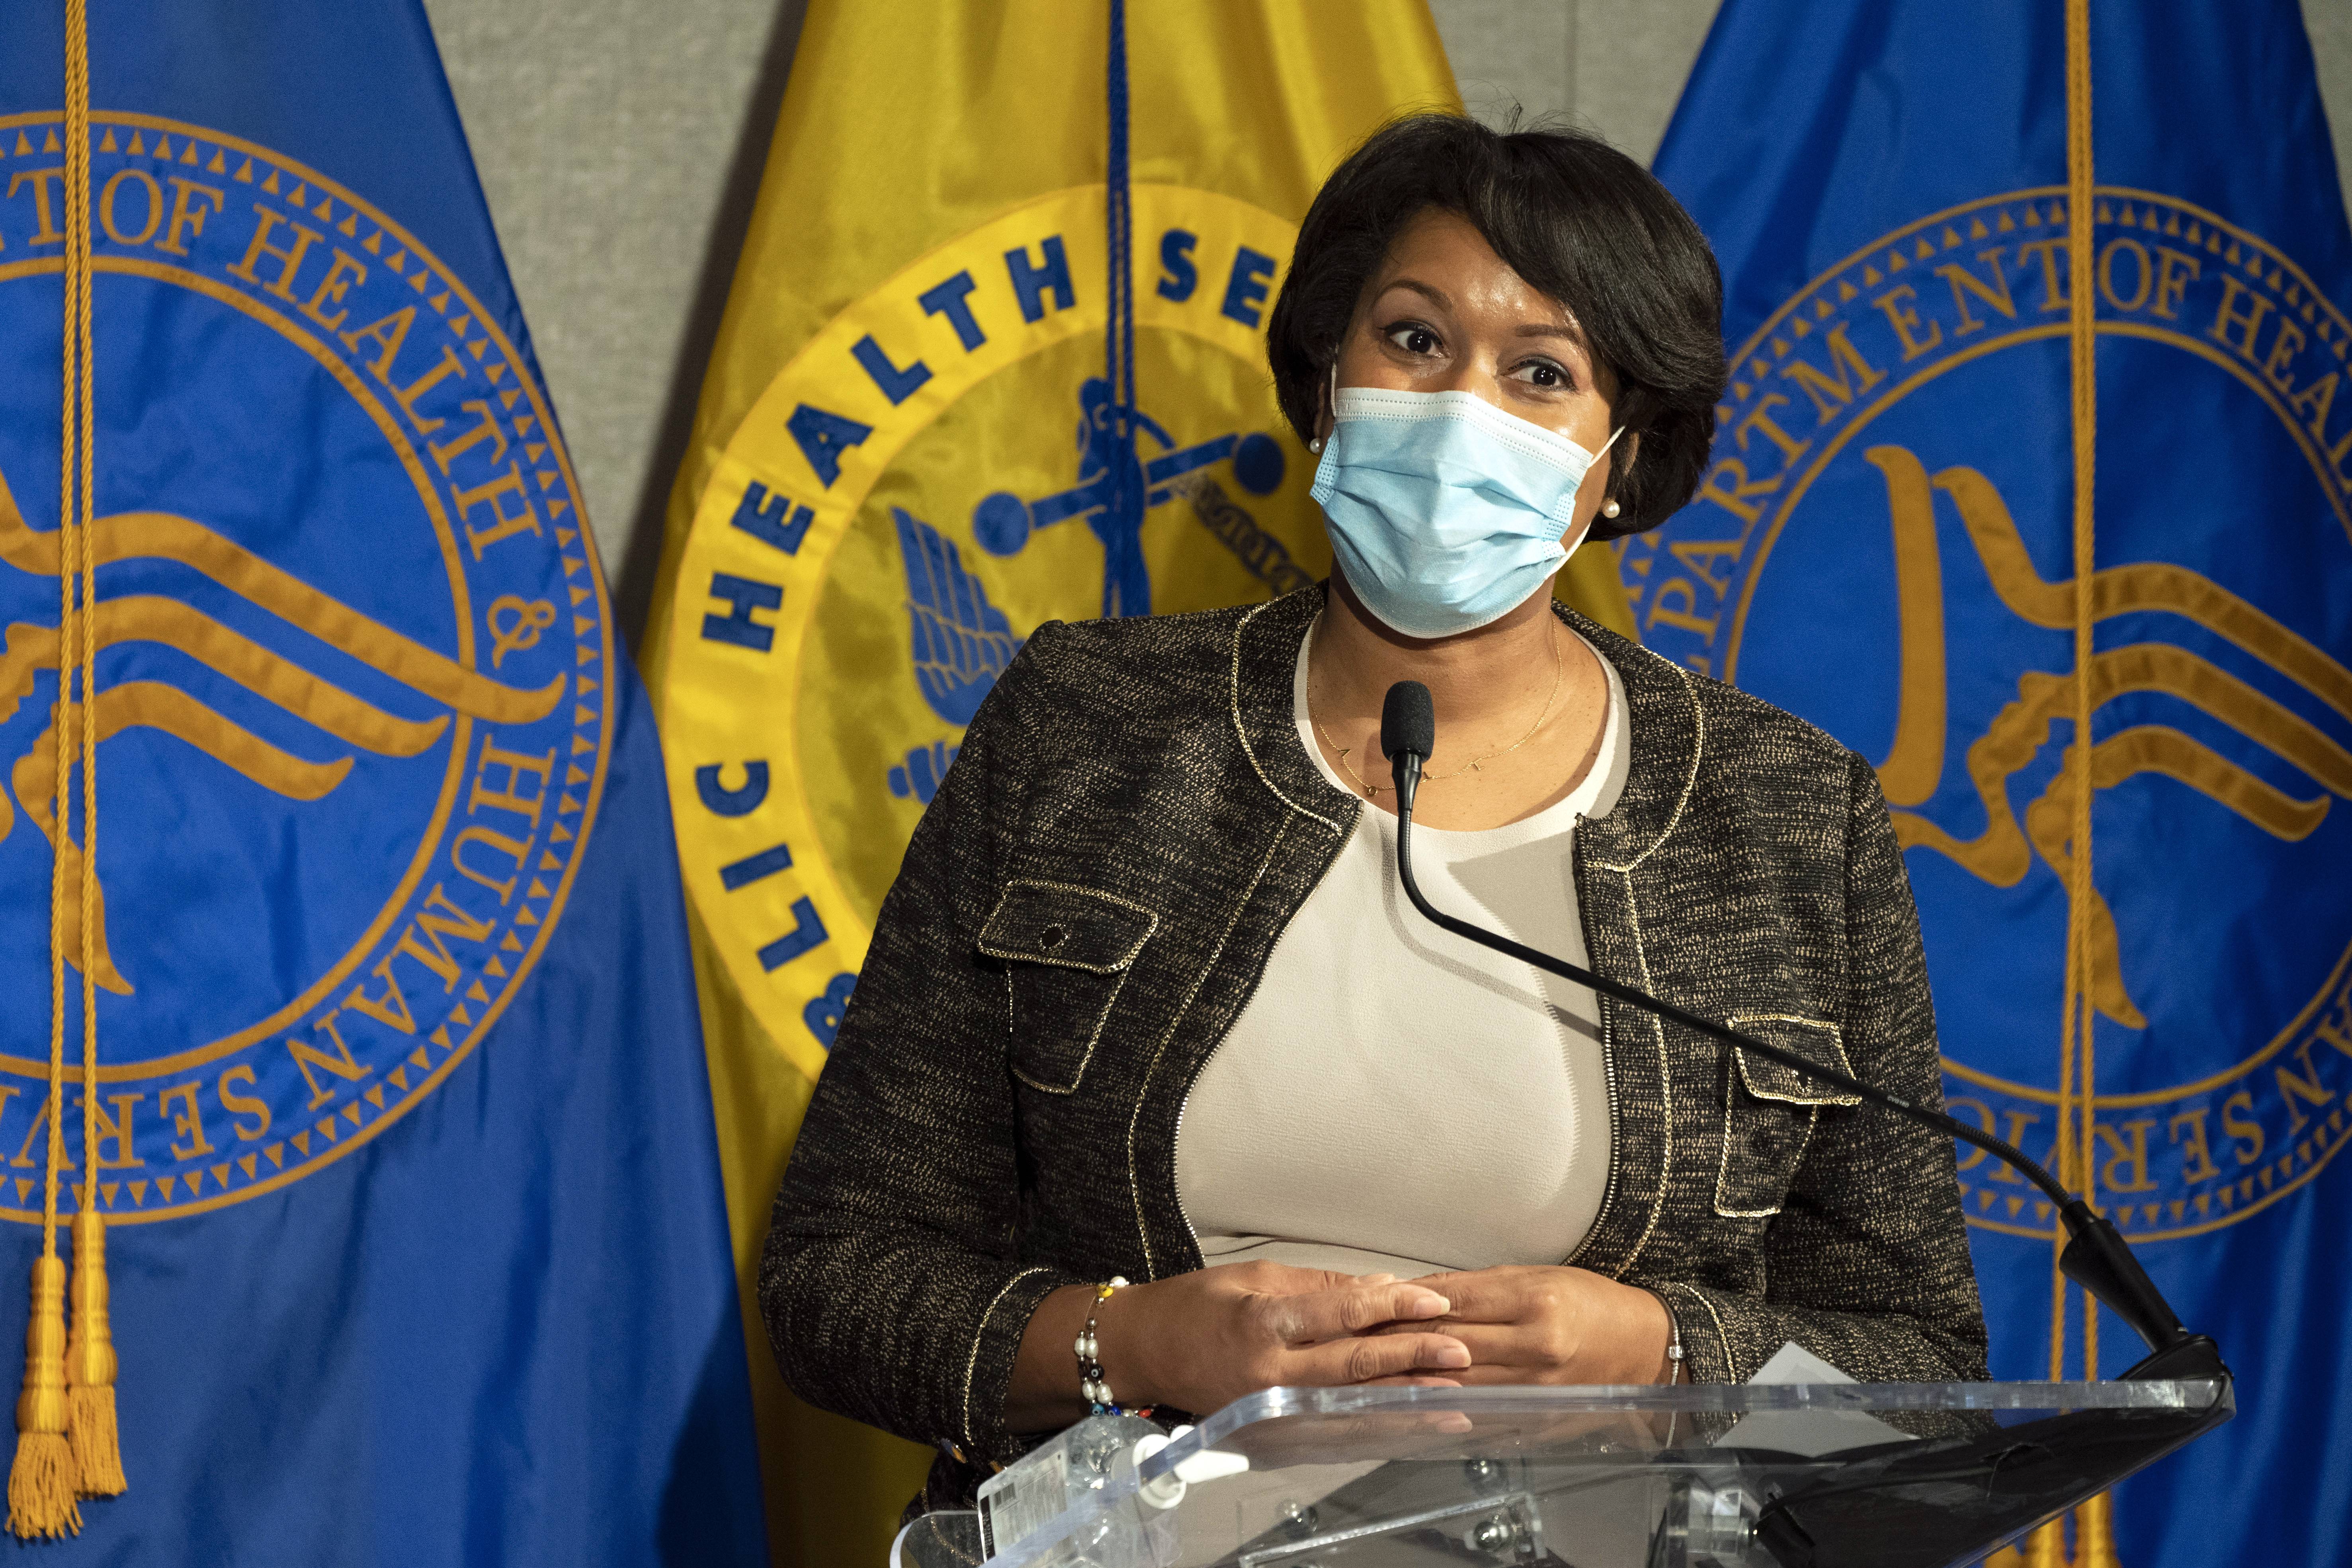 District of Columbia Mayor Muriel Bowser speaks during a news conference about the COVID-19 vaccine with Health and Human Services Secretary Alex Azar and Surgeon General Jerome Adams at George Washington University Hospital, Monday, Dec. 14, 2020, in Washington. (AP Photo/Jacquelyn Martin, Pool)